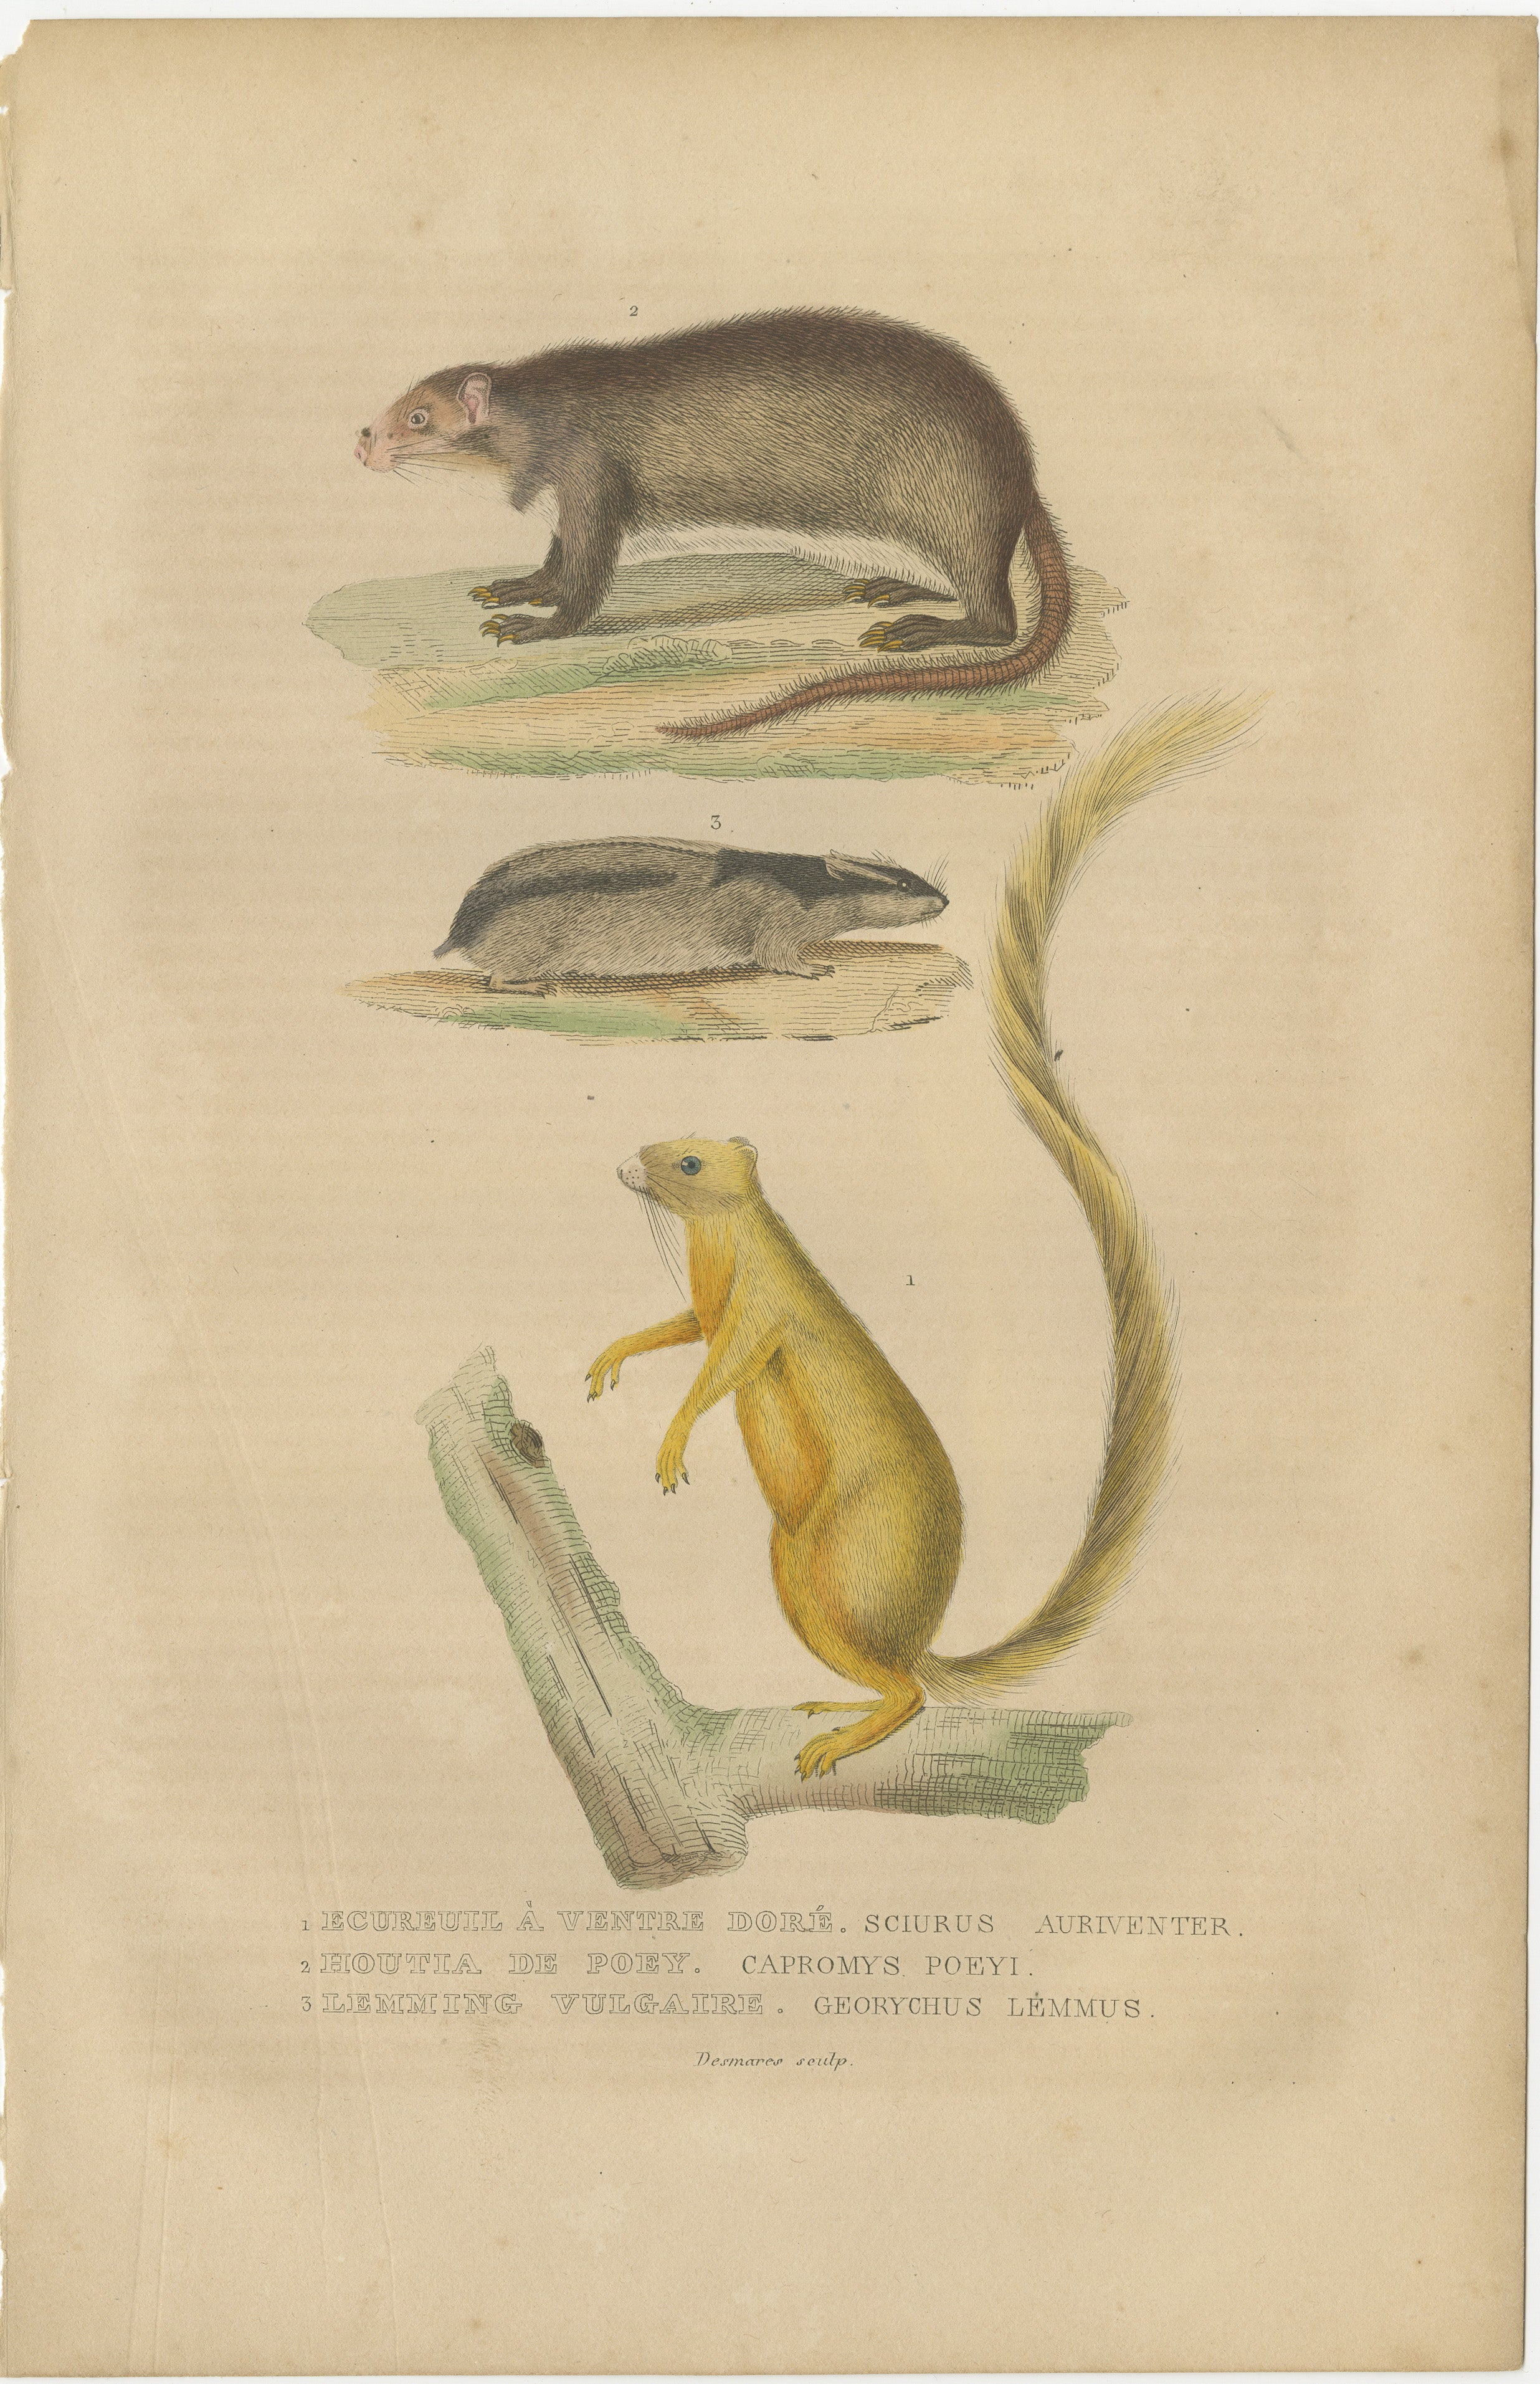 The image features three different mammal species:

1. **Sciurus aureventer** - This is likely an old taxonomic name, and the animal depicted resembles a squirrel, recognizable by its bushy tail and alert posture. The term 